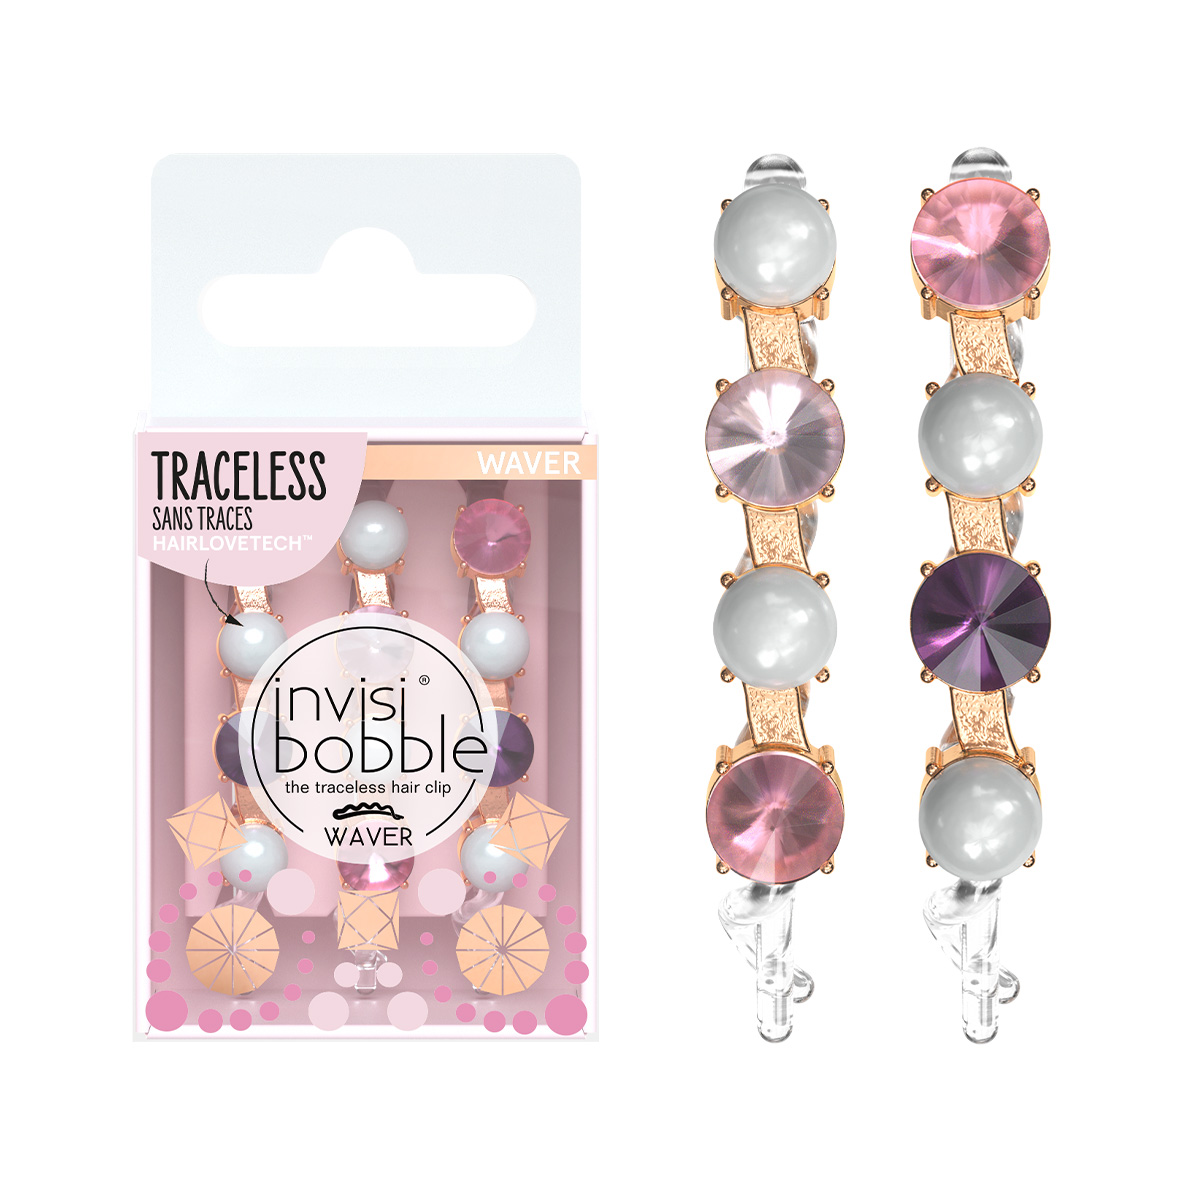 INVISIBOBBLE Заколка для волос / invisibobble WAVER British Royal To Bead or not to Bead original mga4012zb o15 4015 12v 0 20a 2 wire double bead heat dissipation fan